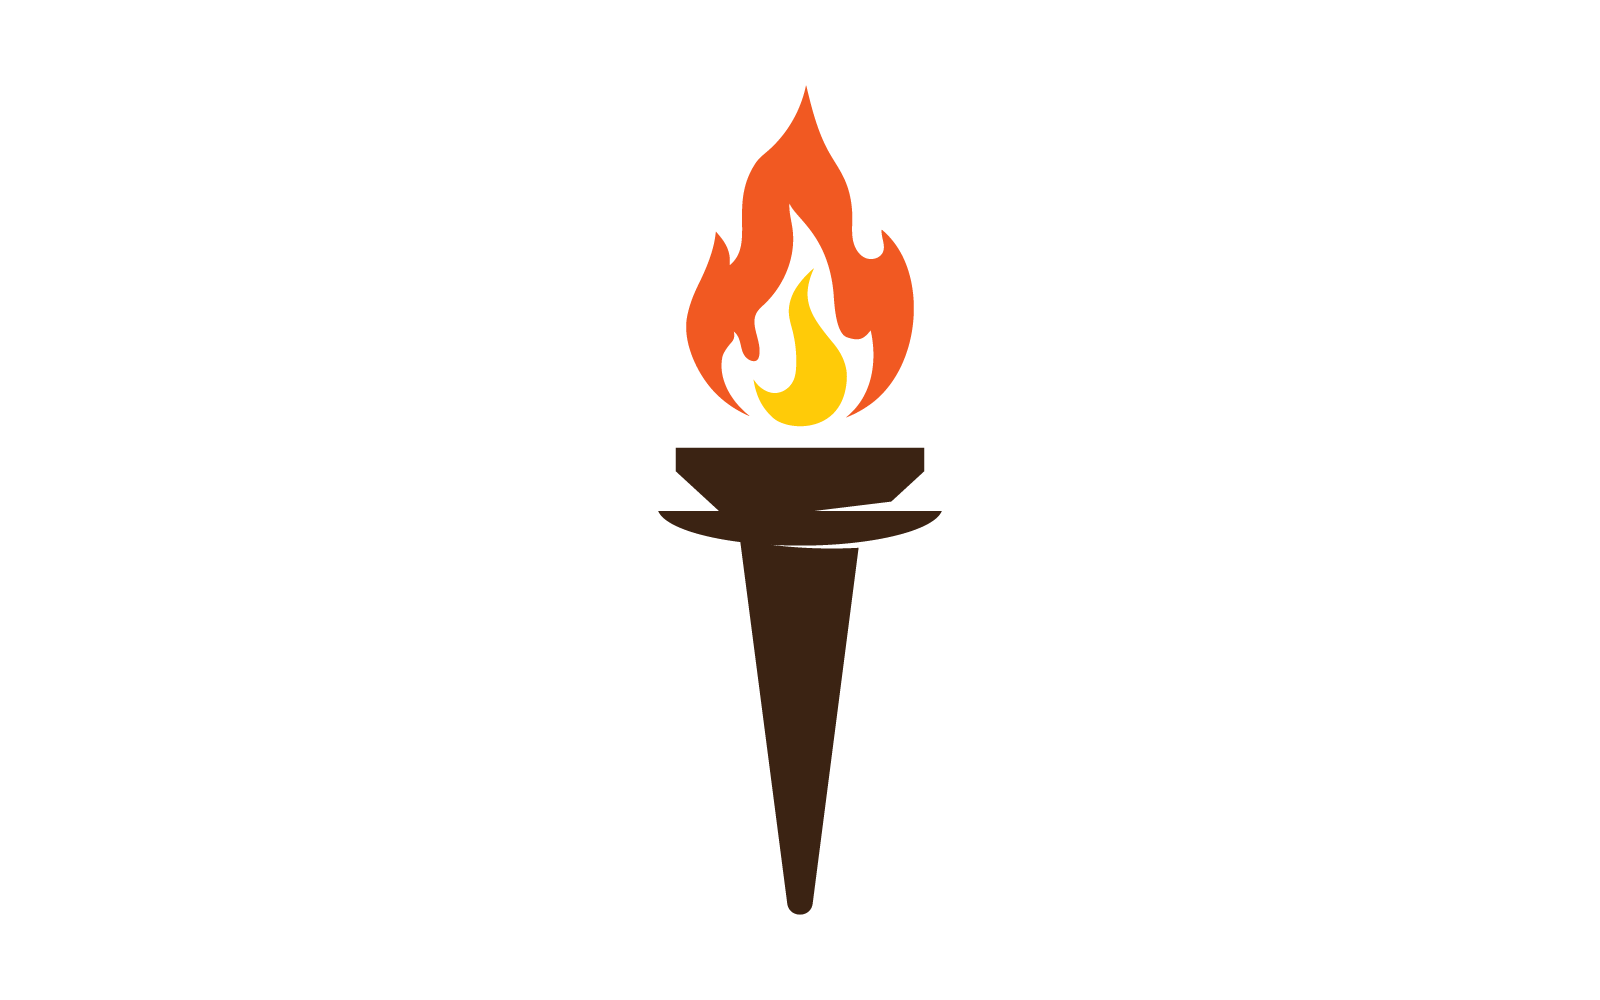 Illustration of torch fire icon flat design template